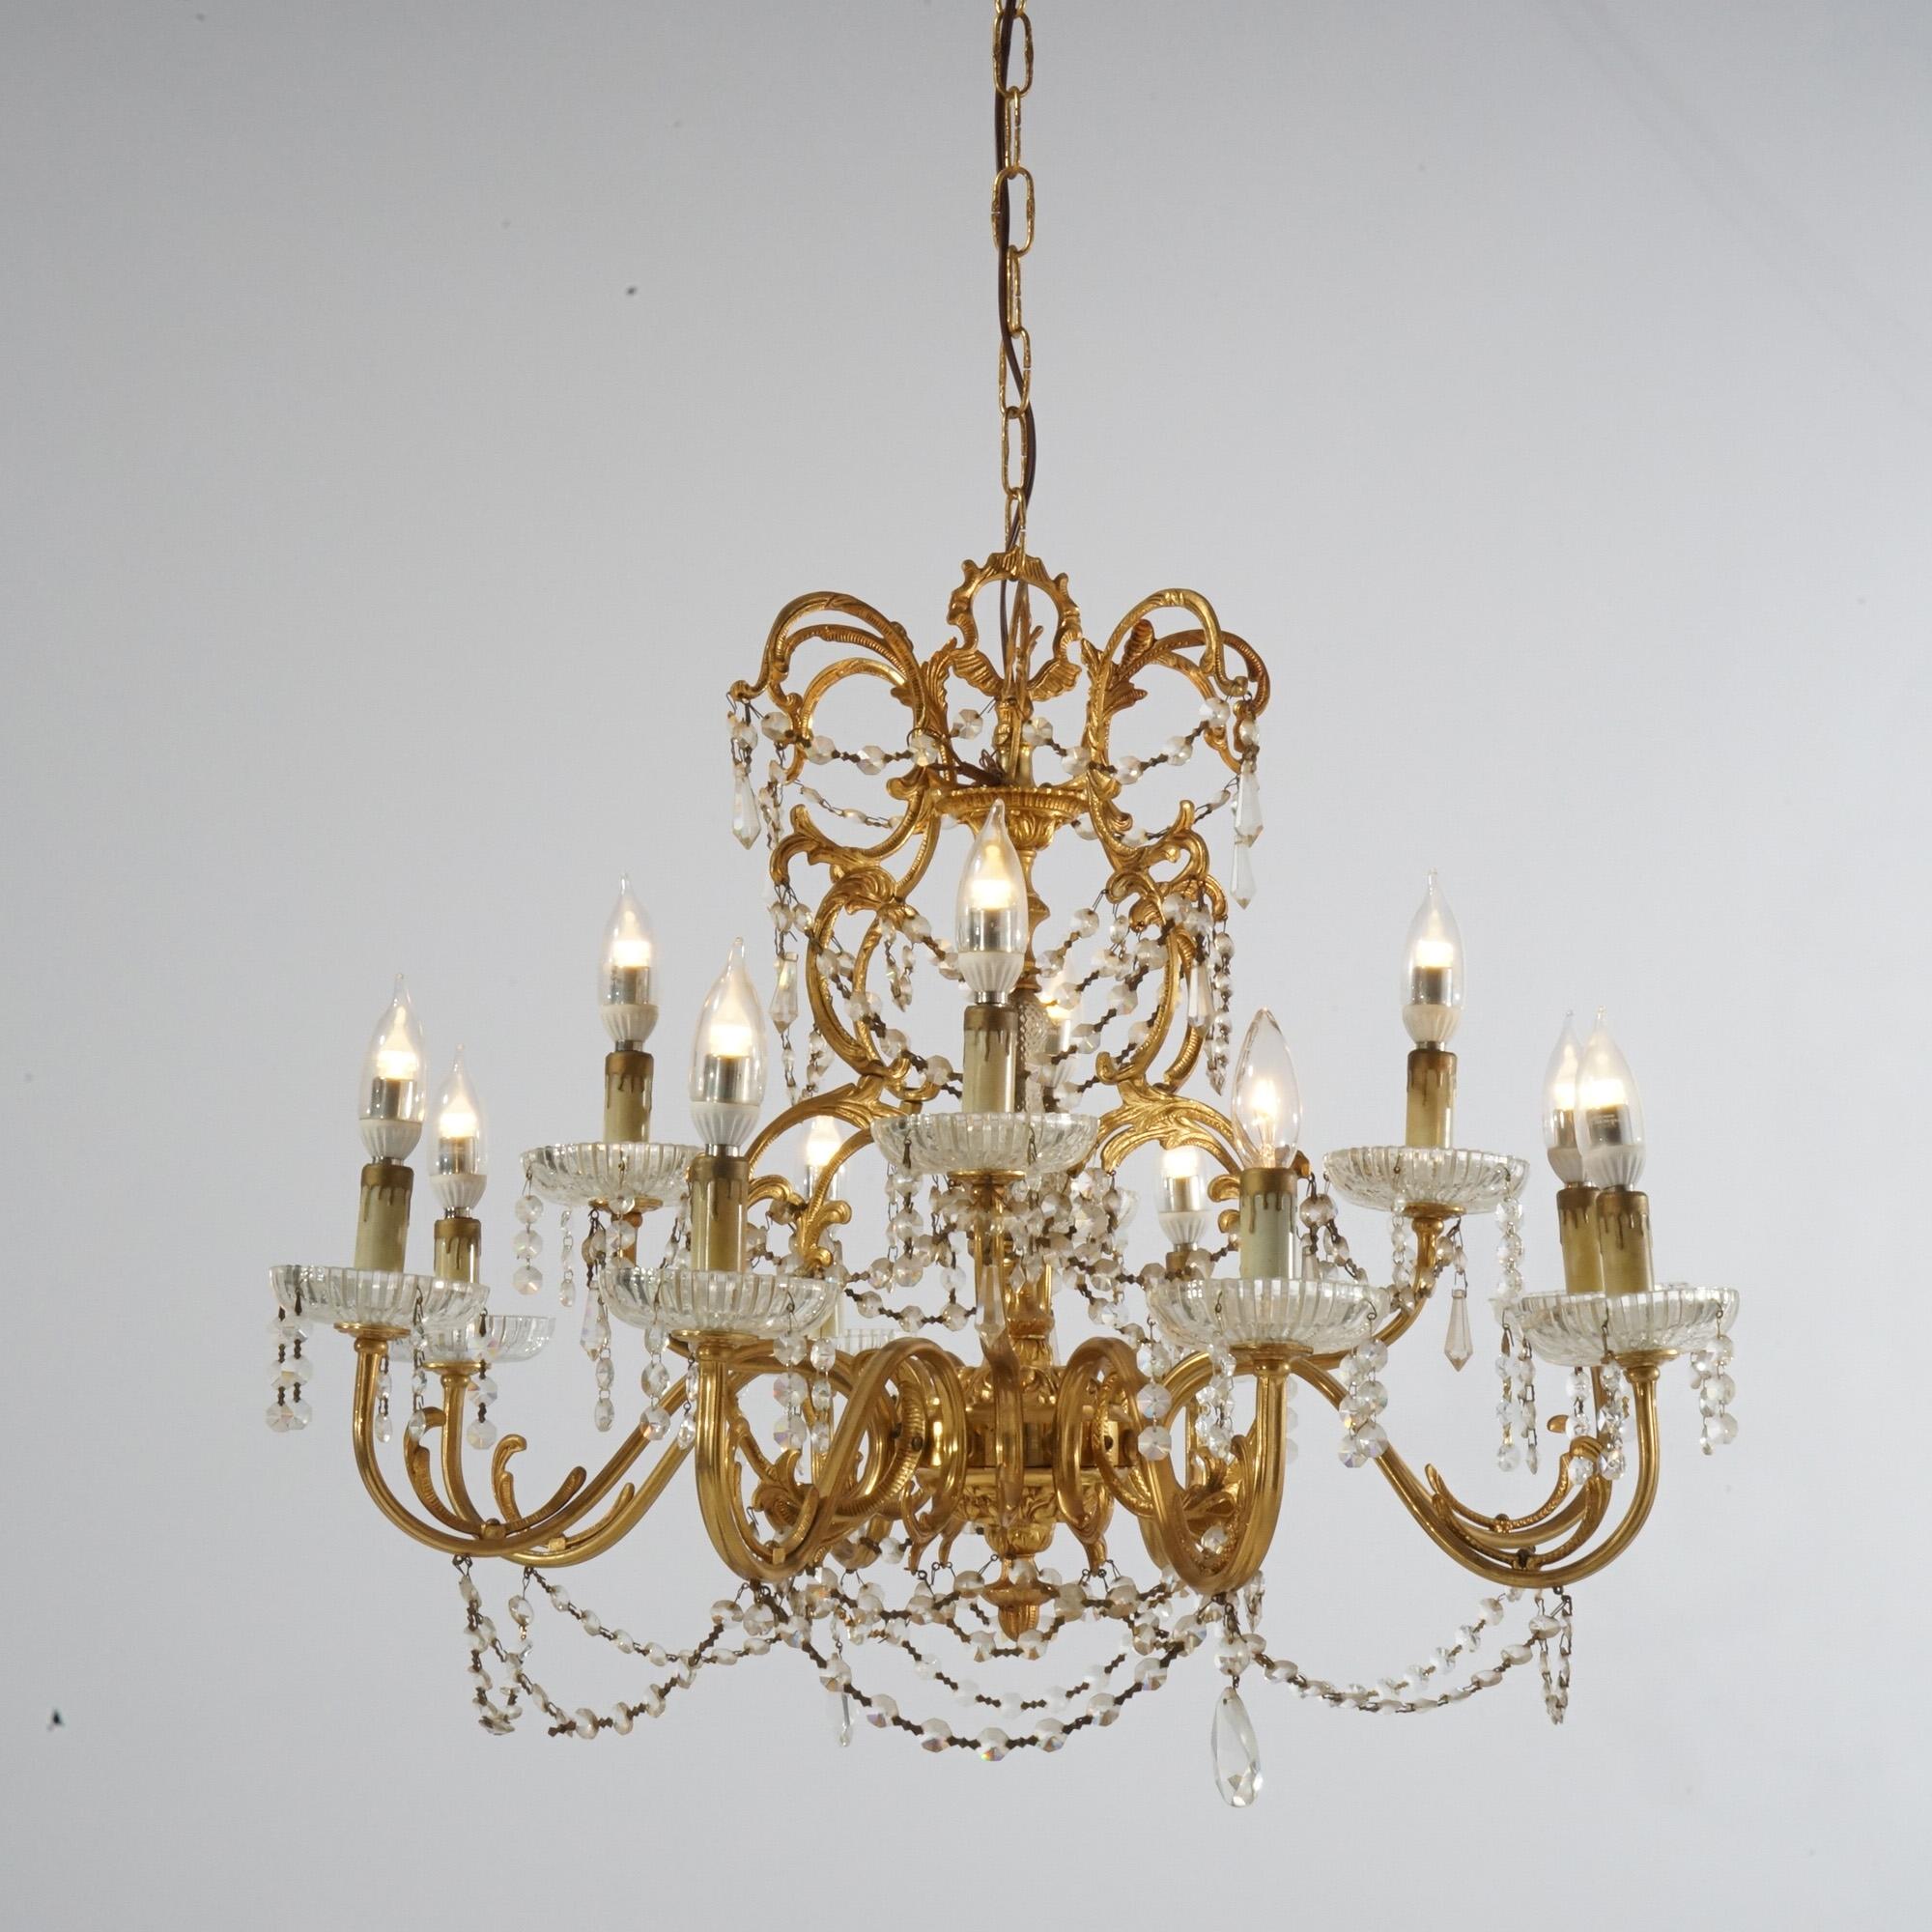 An antique French style chandelier offers a gilt frame with scrolled foliate arms terminating in twelve candle lights, strung and drop crystals throughout, c1930.

Measures- 38''H x 26.5''W x 26.5''D; 12'' drop.